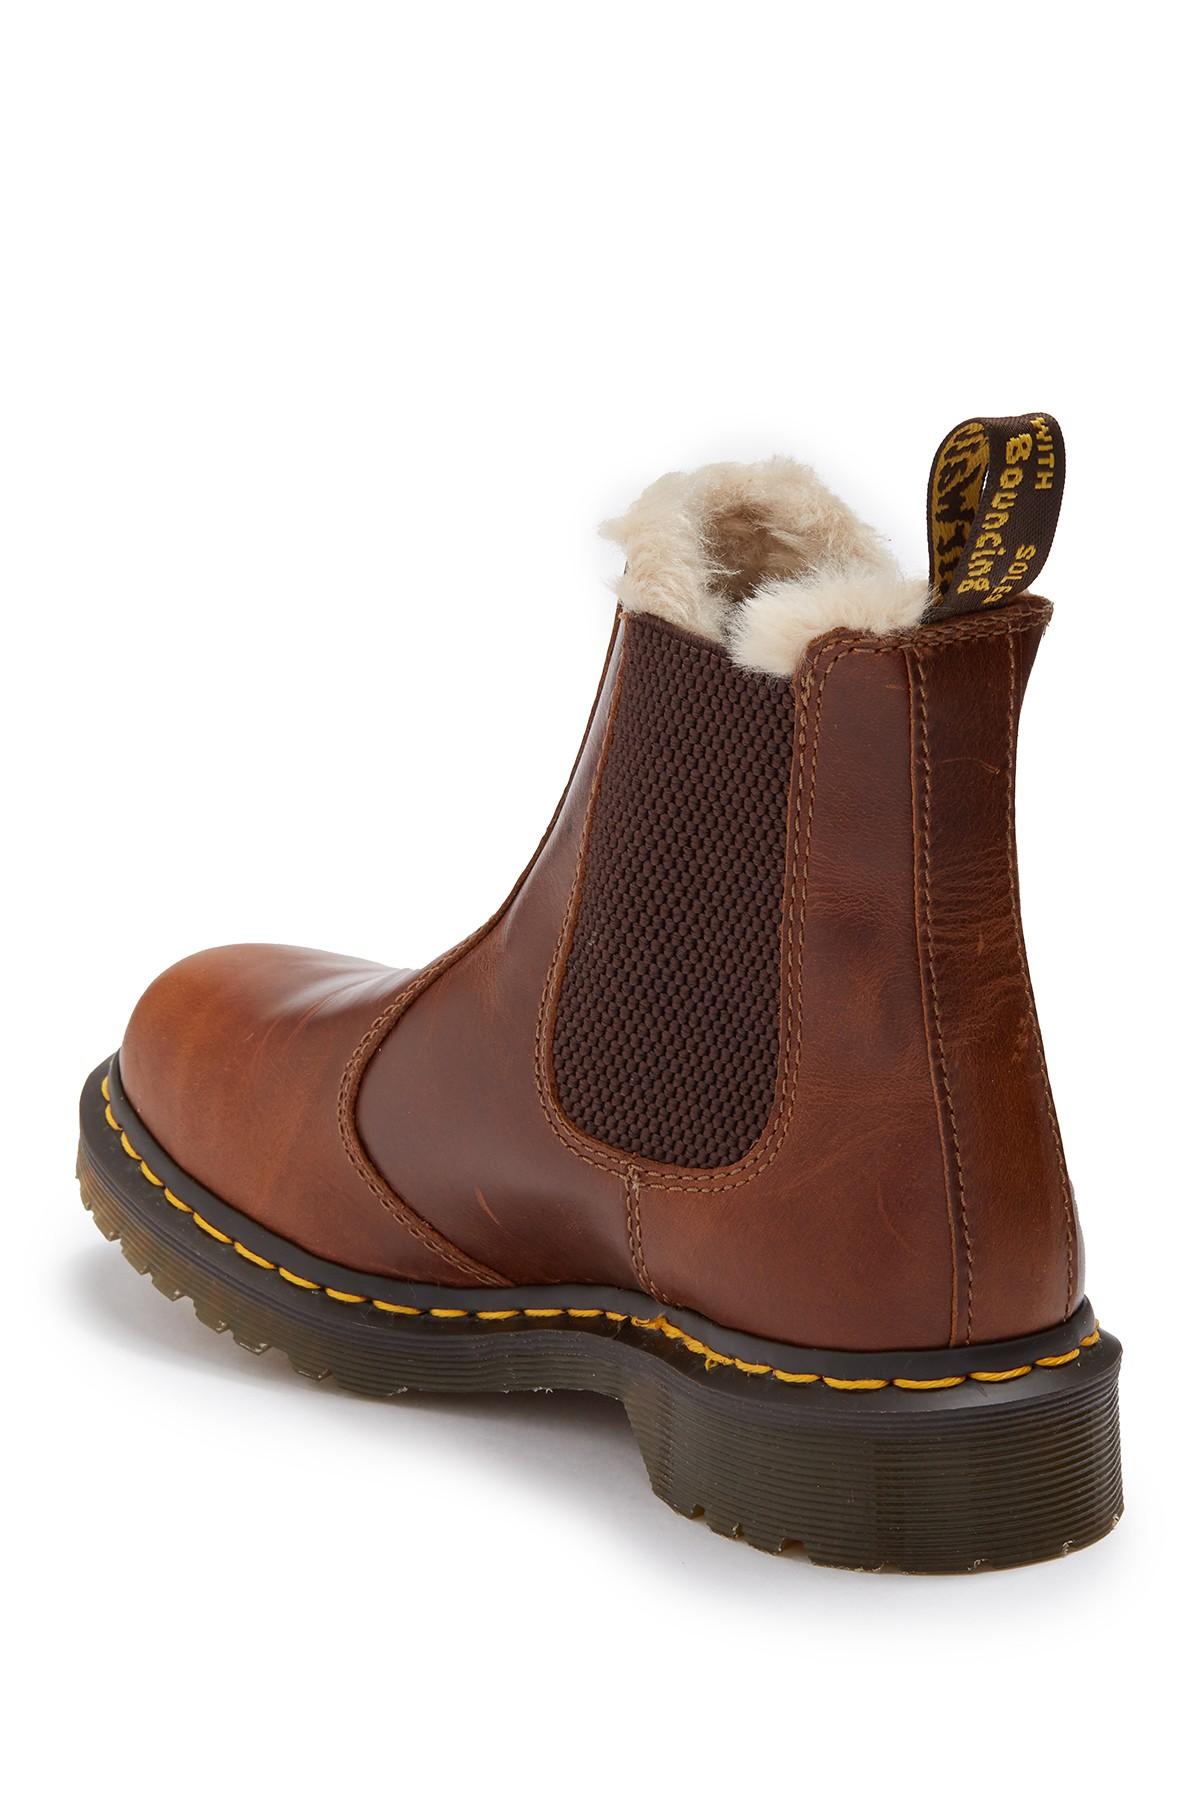 Dr. Martens 2976 Leonore Orleans in Butterscotch (Brown) - Save 63% | Lyst